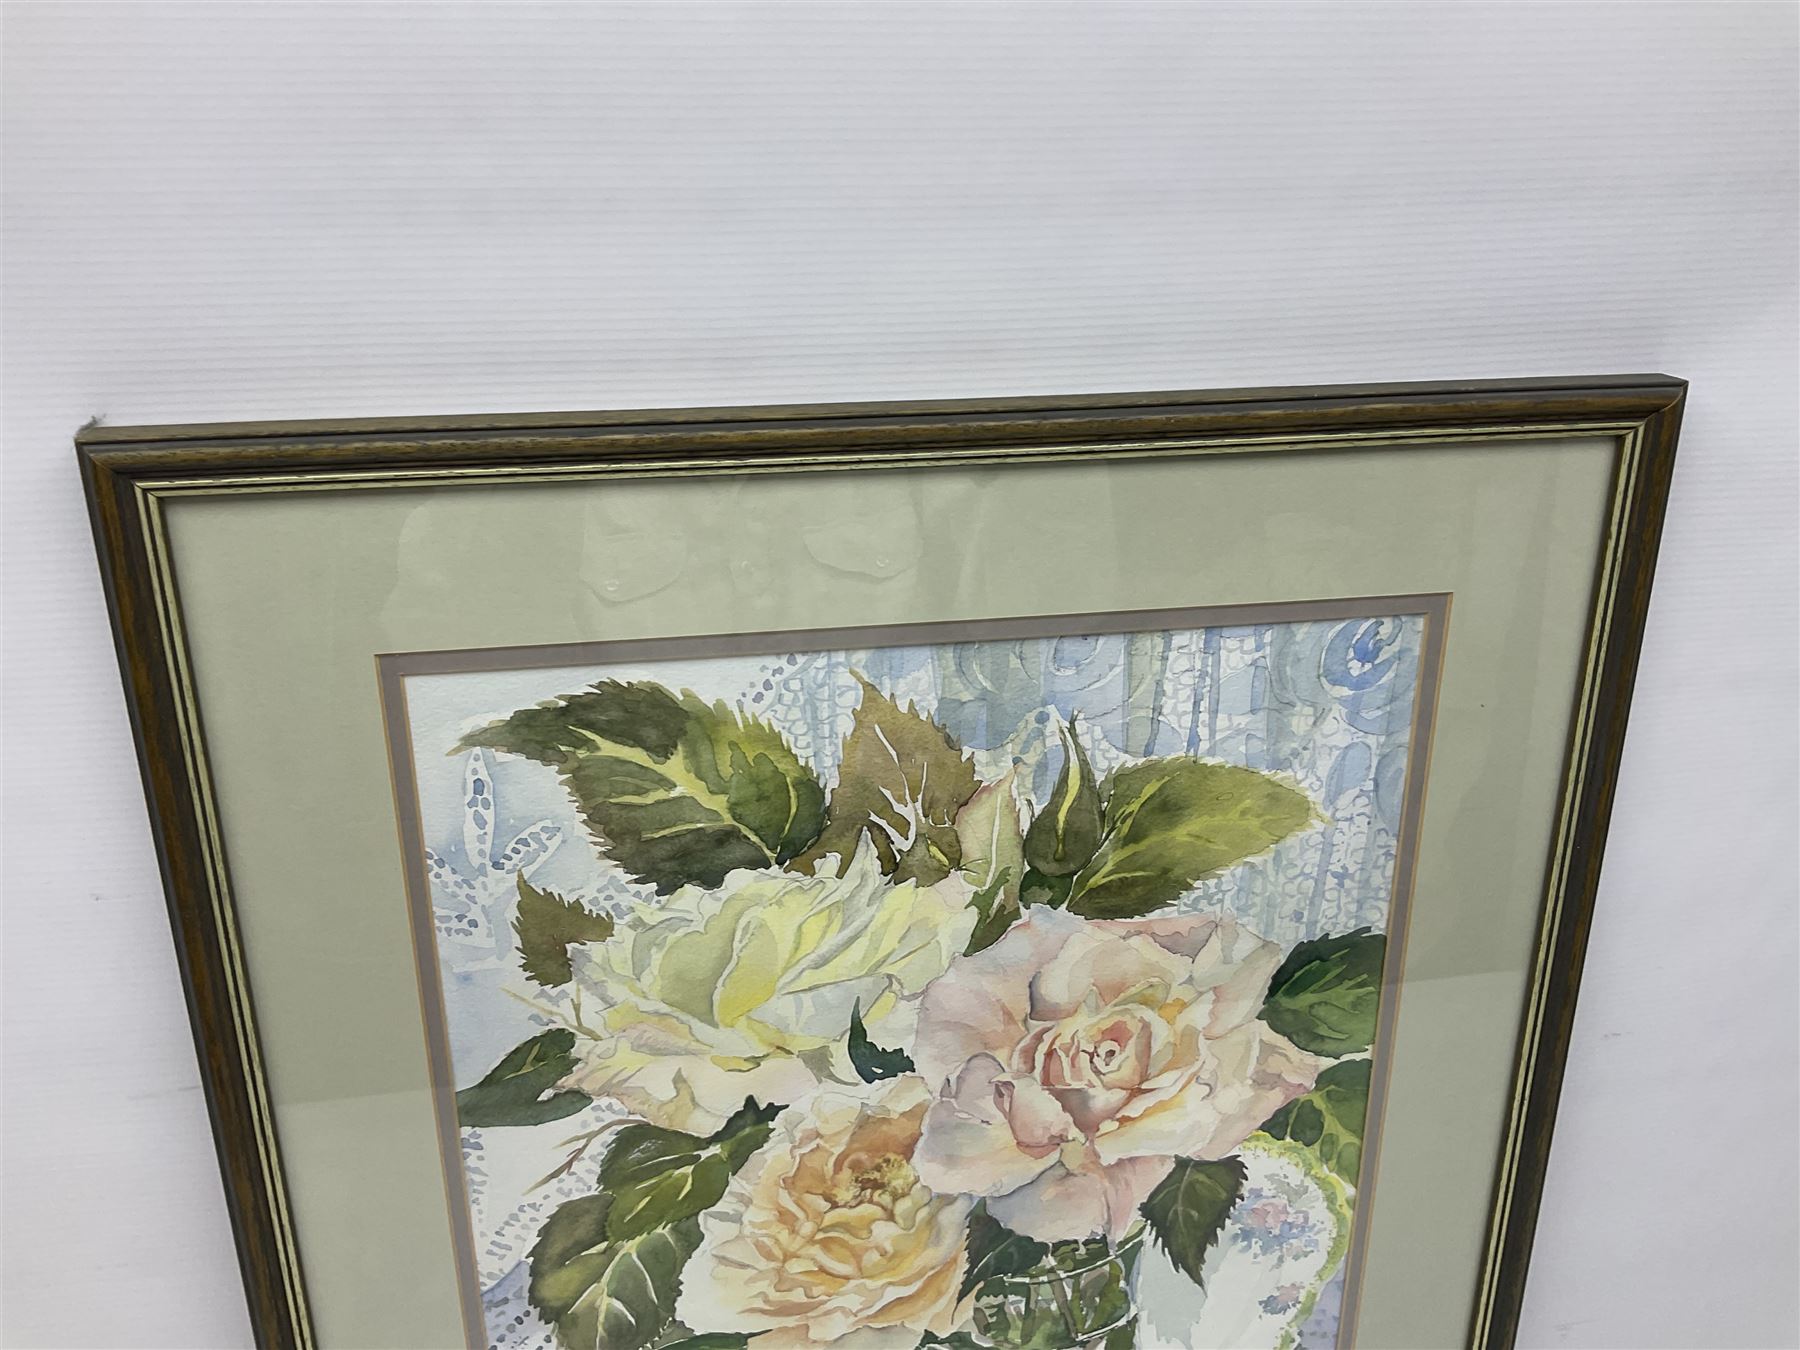 Angela McCall: 'Last of the Summer Roses' - Image 2 of 5